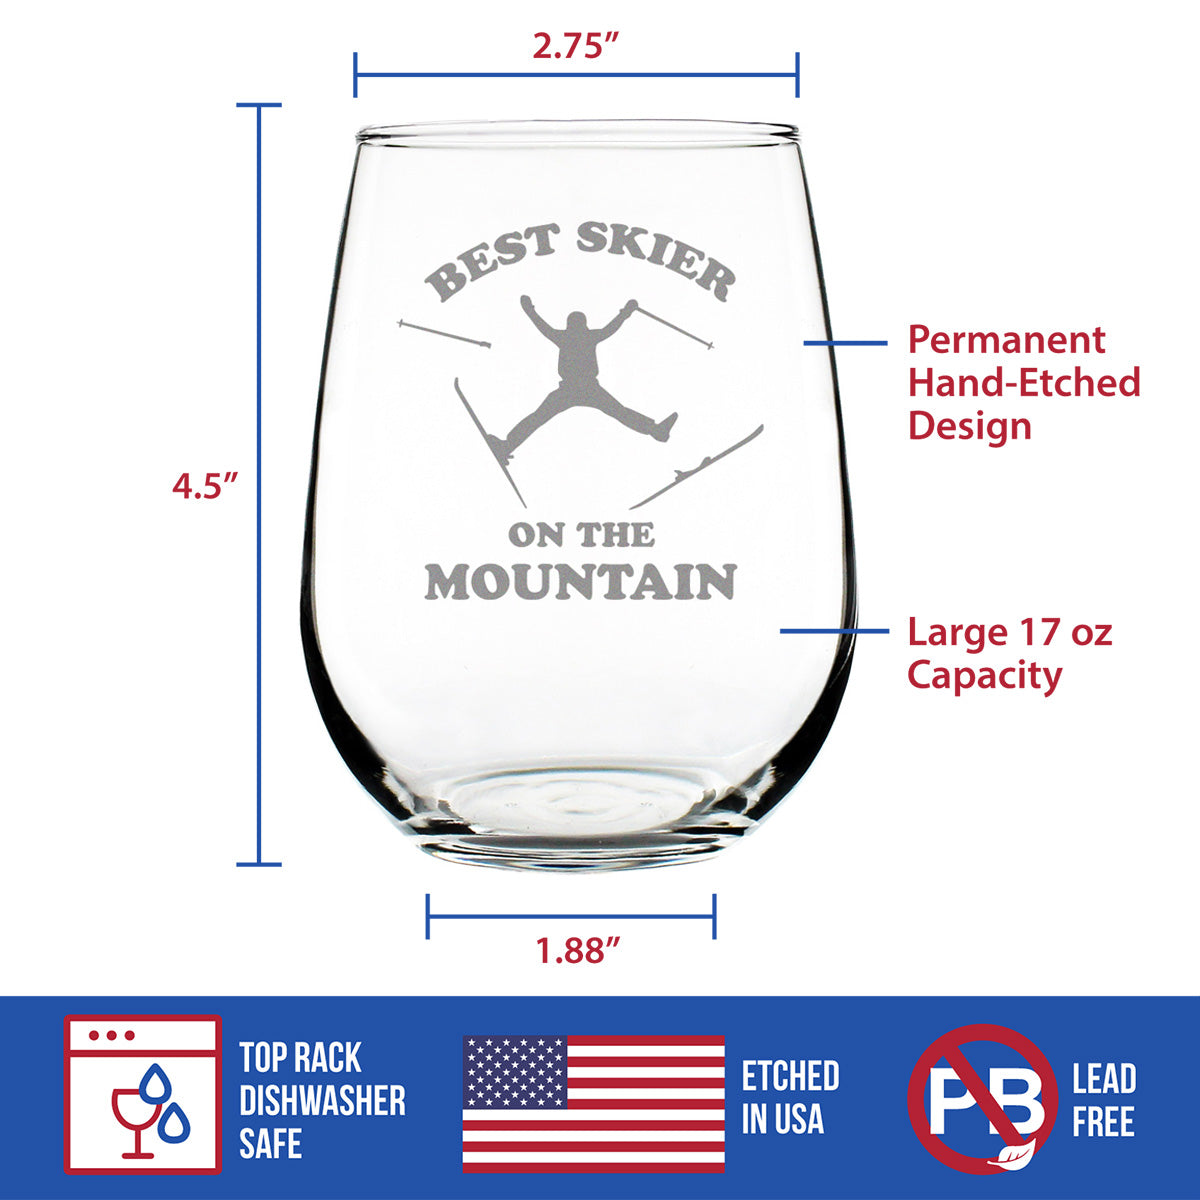 Best Skier - Stemless Wine Glass - Unique Skiing Themed Decor and Gifts for Mountain Lovers - Large 17 Oz Glasses